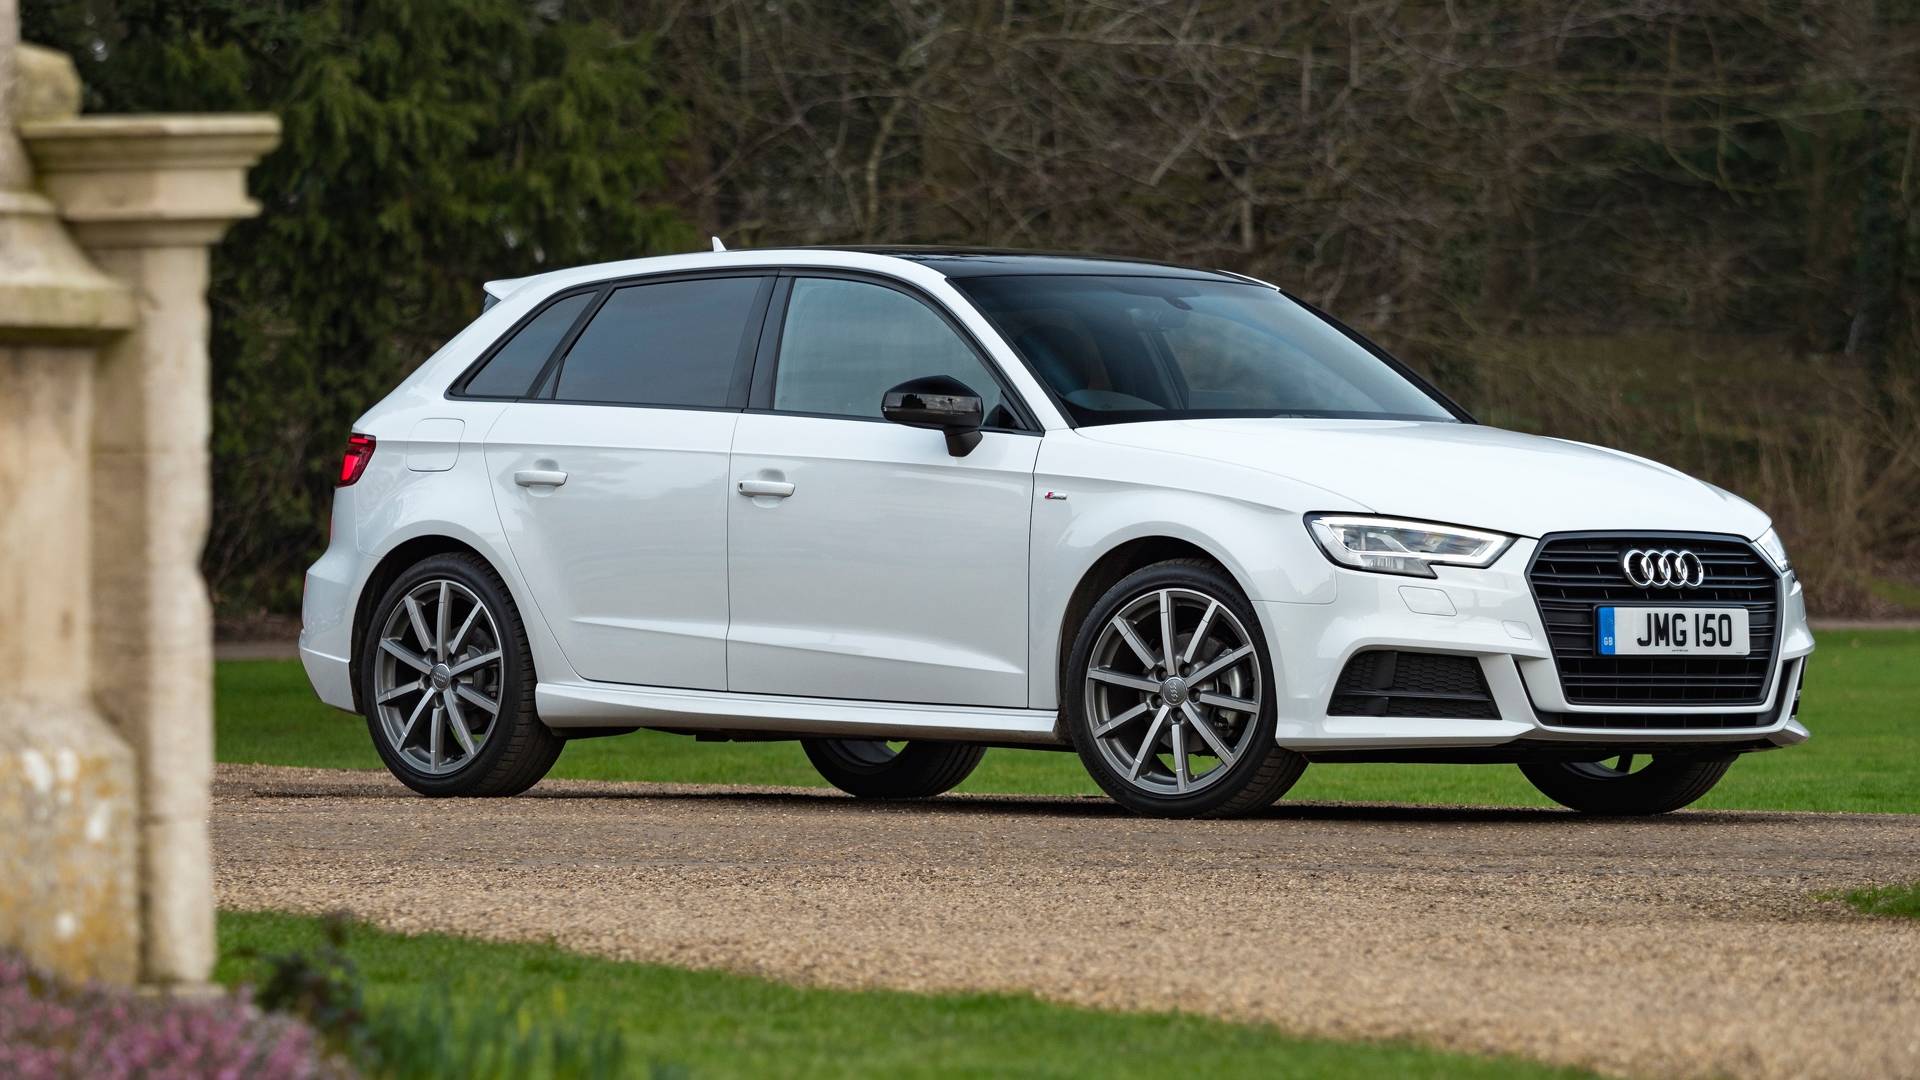 My Audi A3 Sportback | Audi Buyer | Best place to sell my Audi A3